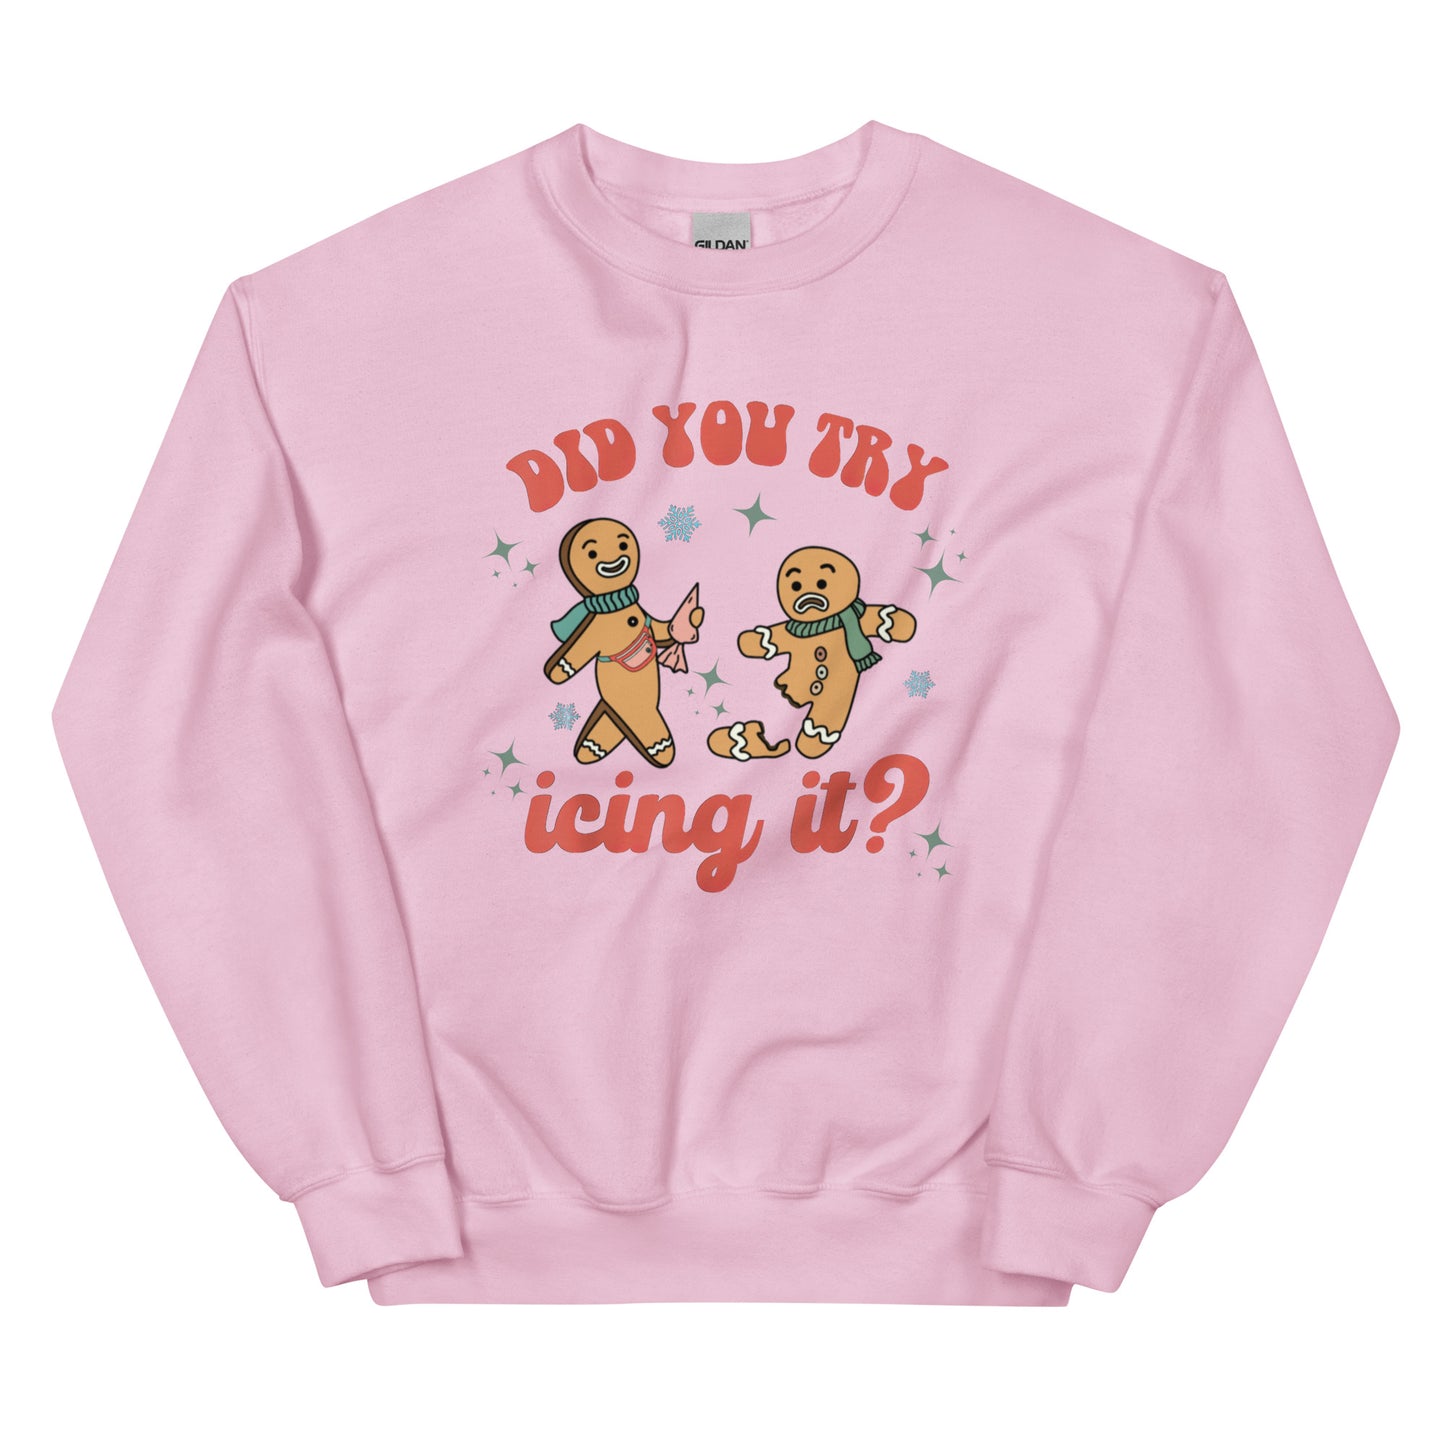 Did you try Icing it? Sweatshirt AT addition